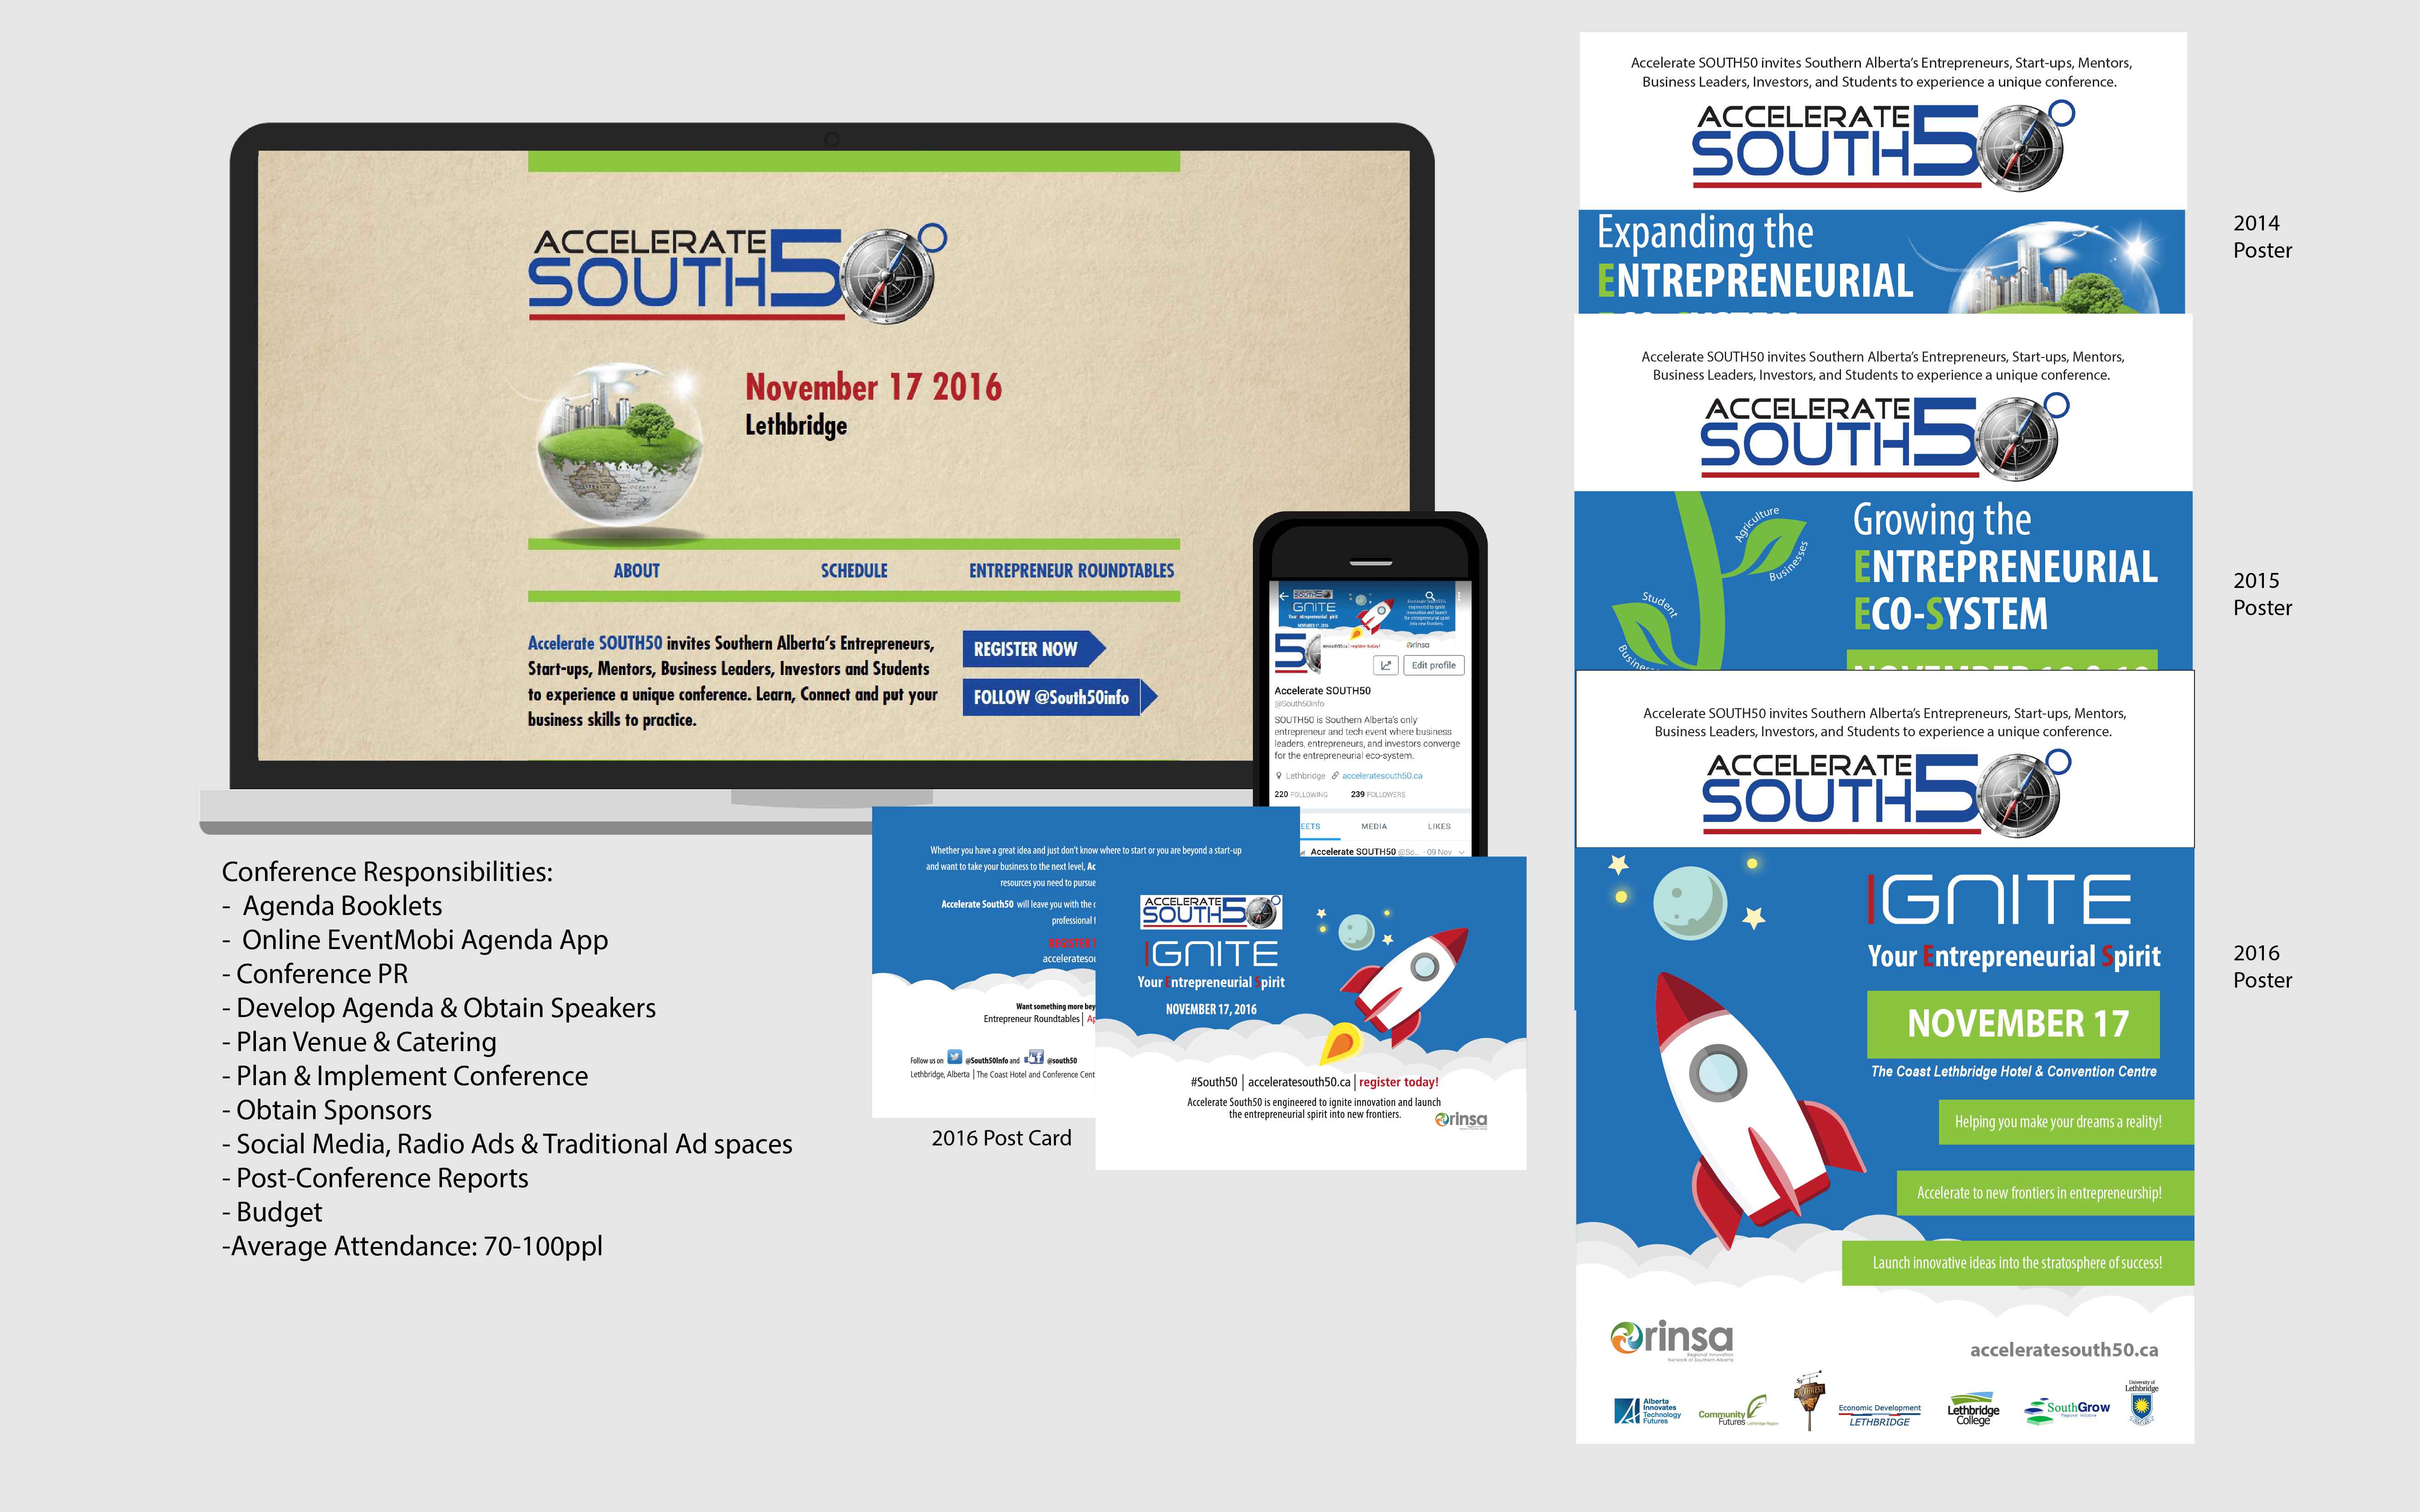 display of print, website and social items created for the South50 campaign